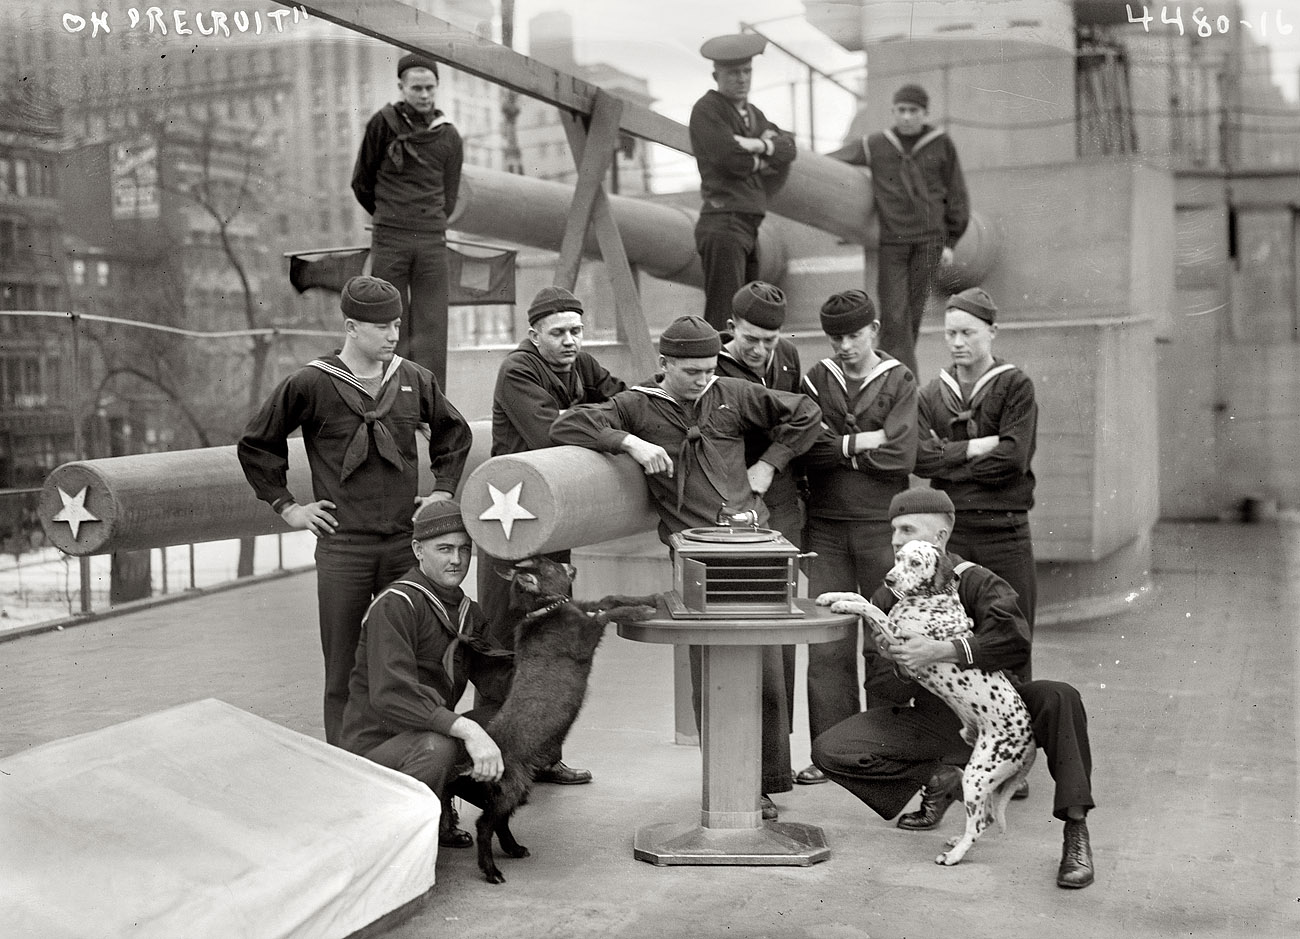 New York, 1917. Another shot of the sailors and mascots aboard the U.S.S. Recruit, a mock battleship moored in Union Square as a Naval recruiting station. View full size. 5x7 glass negative, George Grantham Bain Collection.